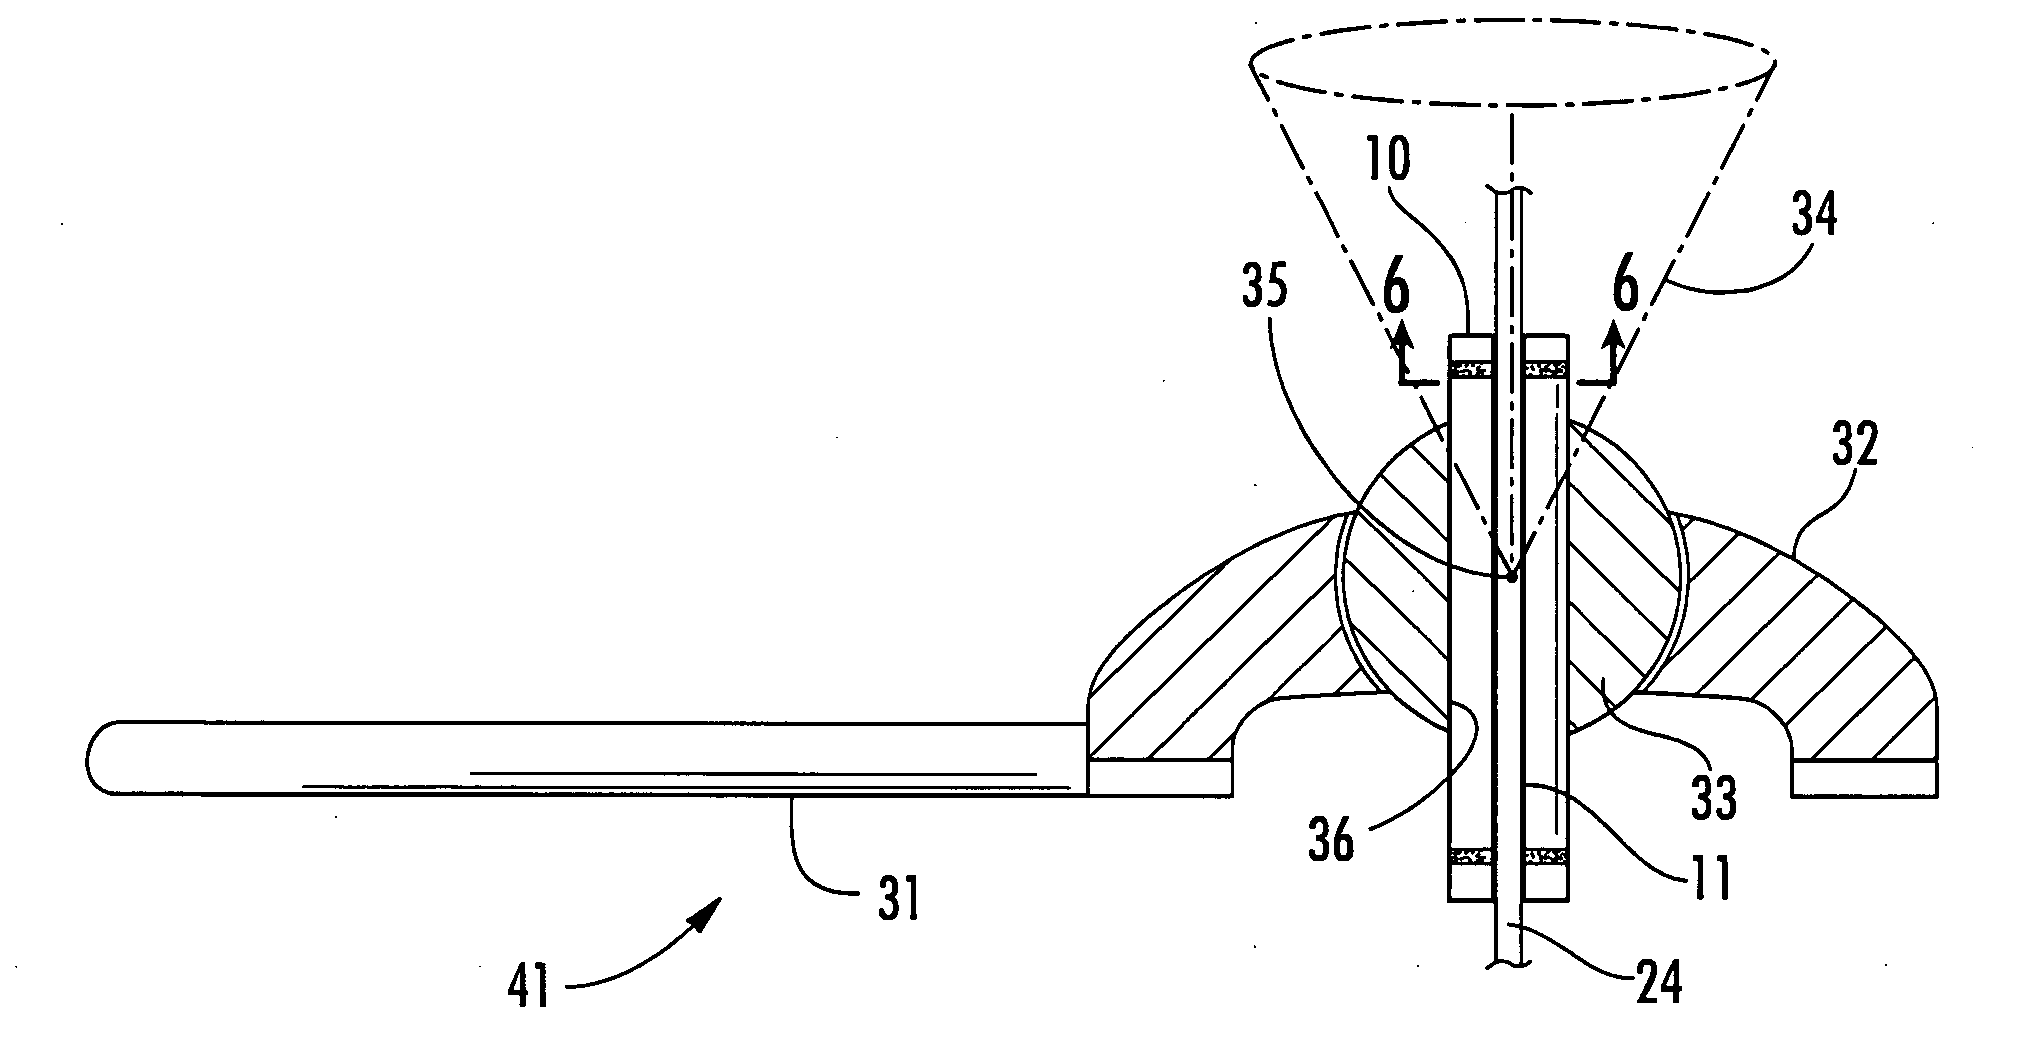 Needle guidance apparatus and method